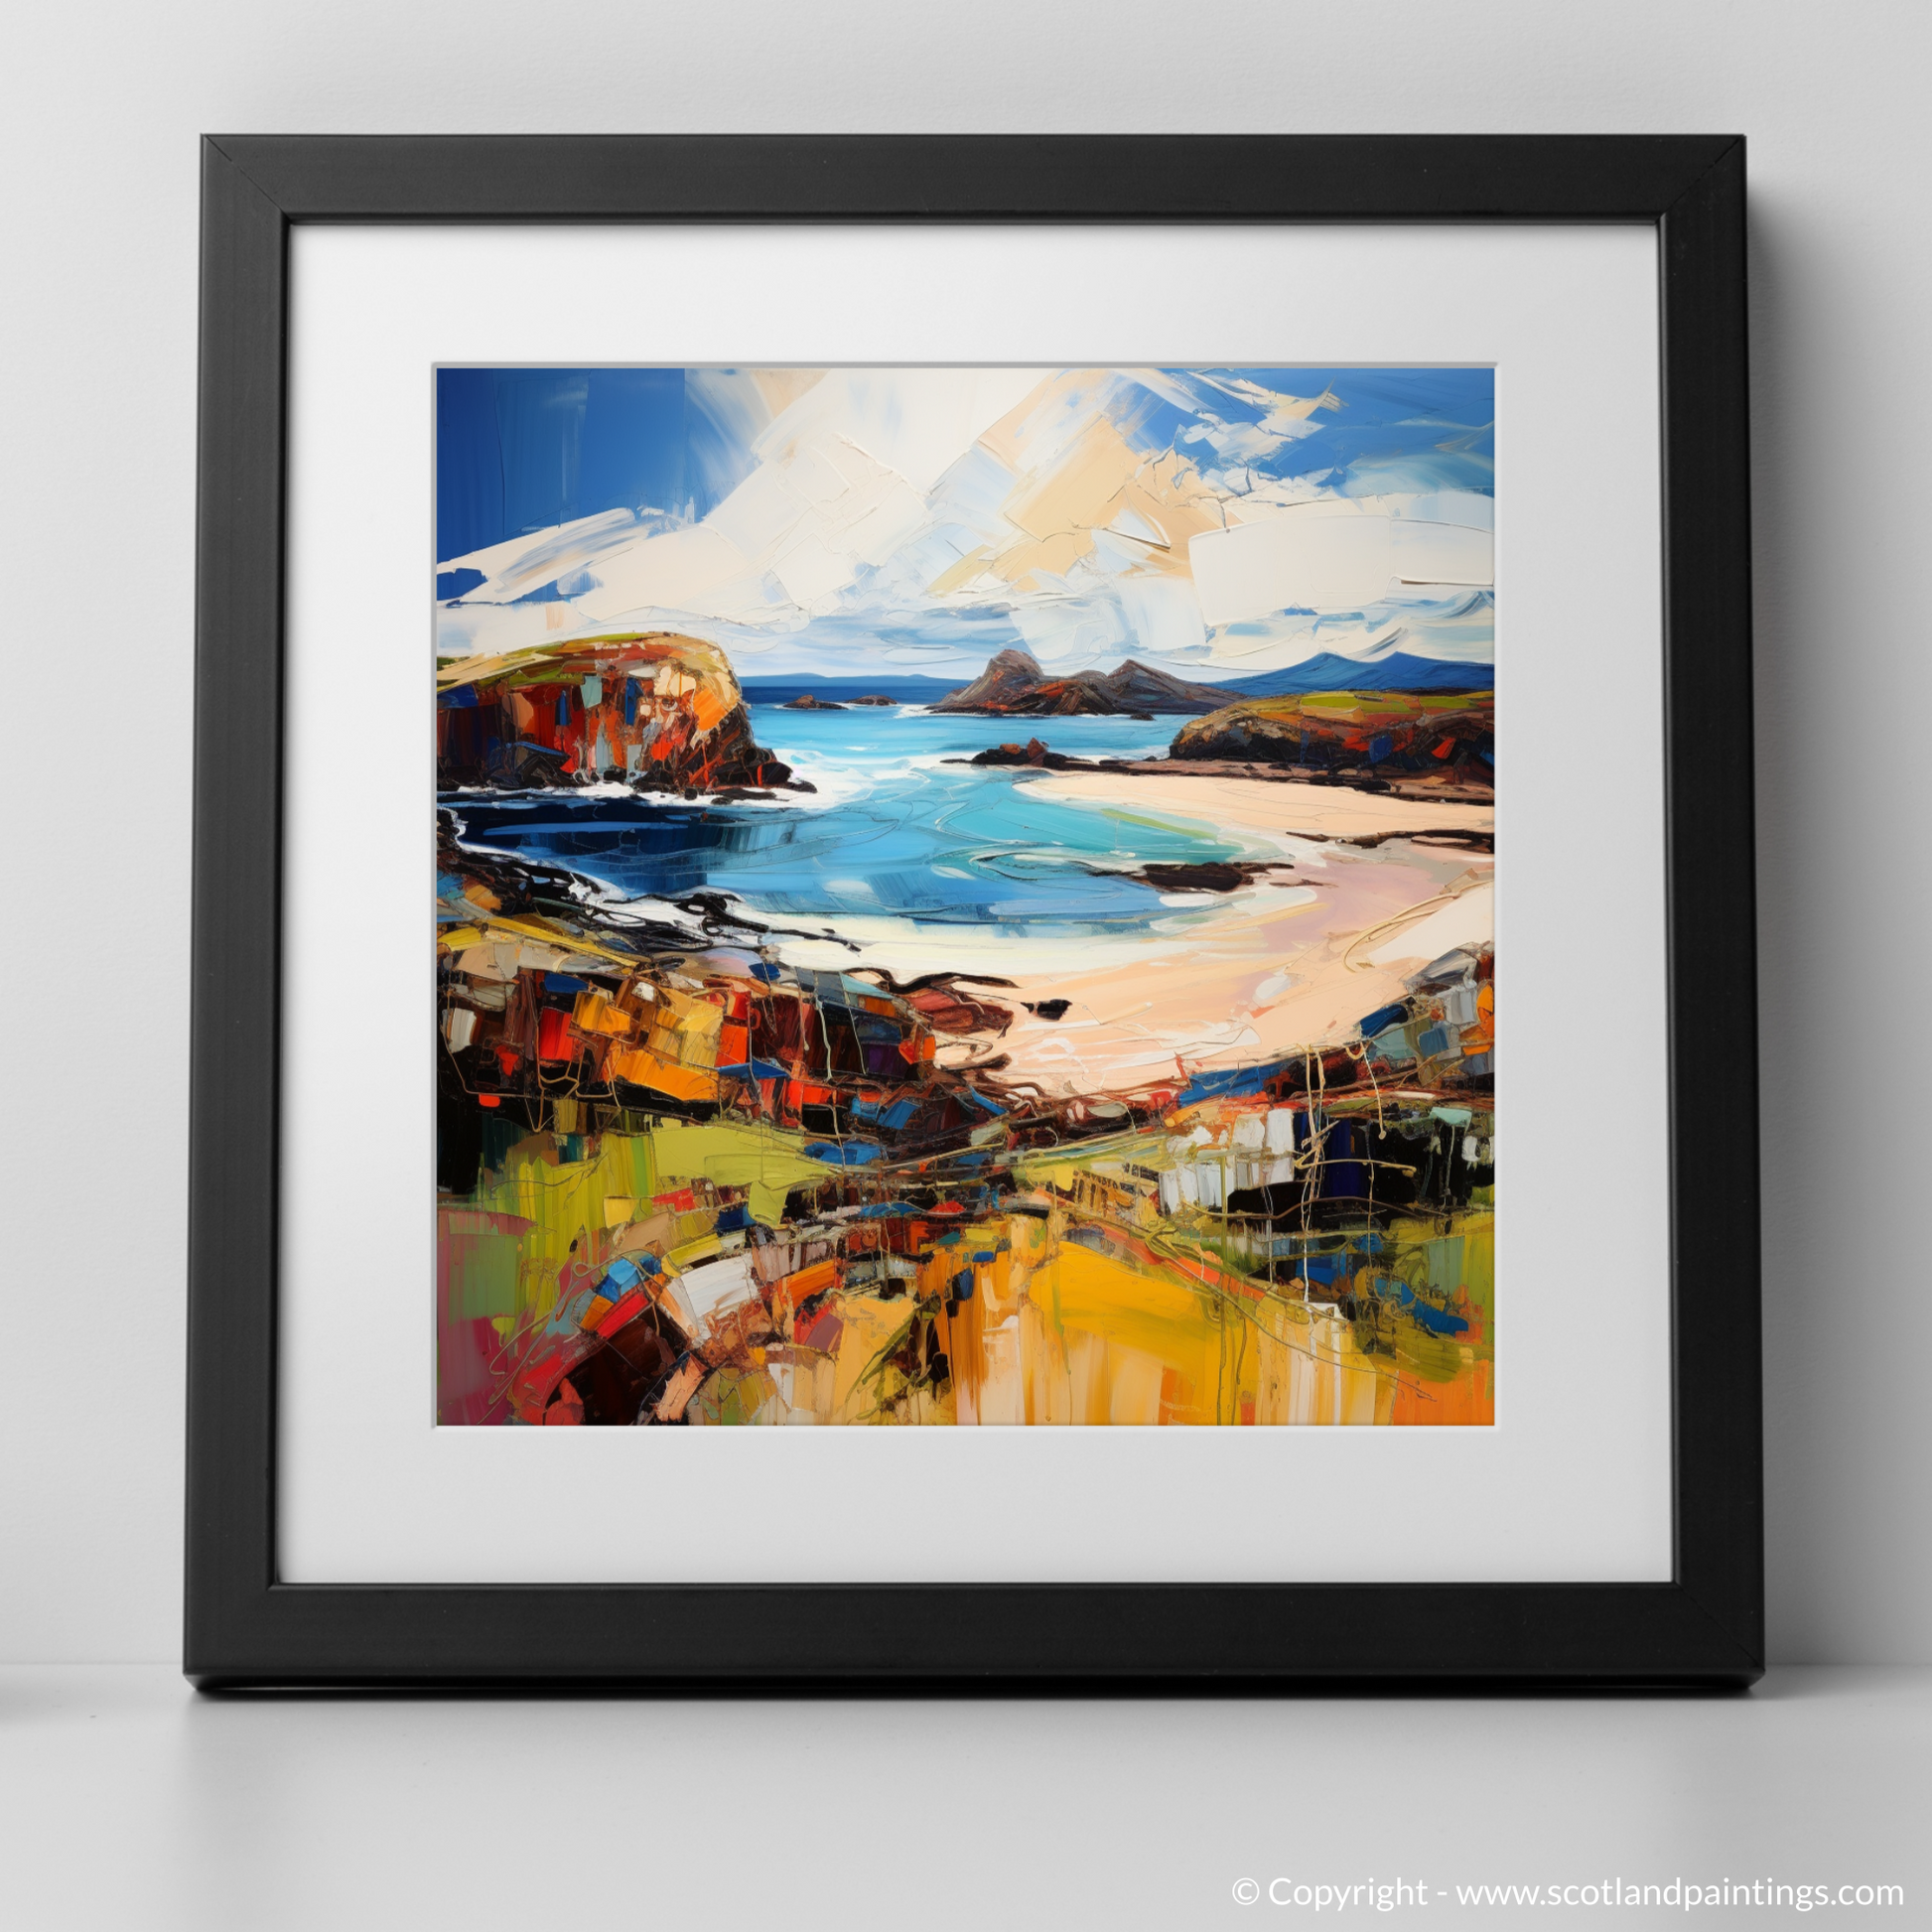 Art Print of Scourie Bay, Sutherland with a black frame